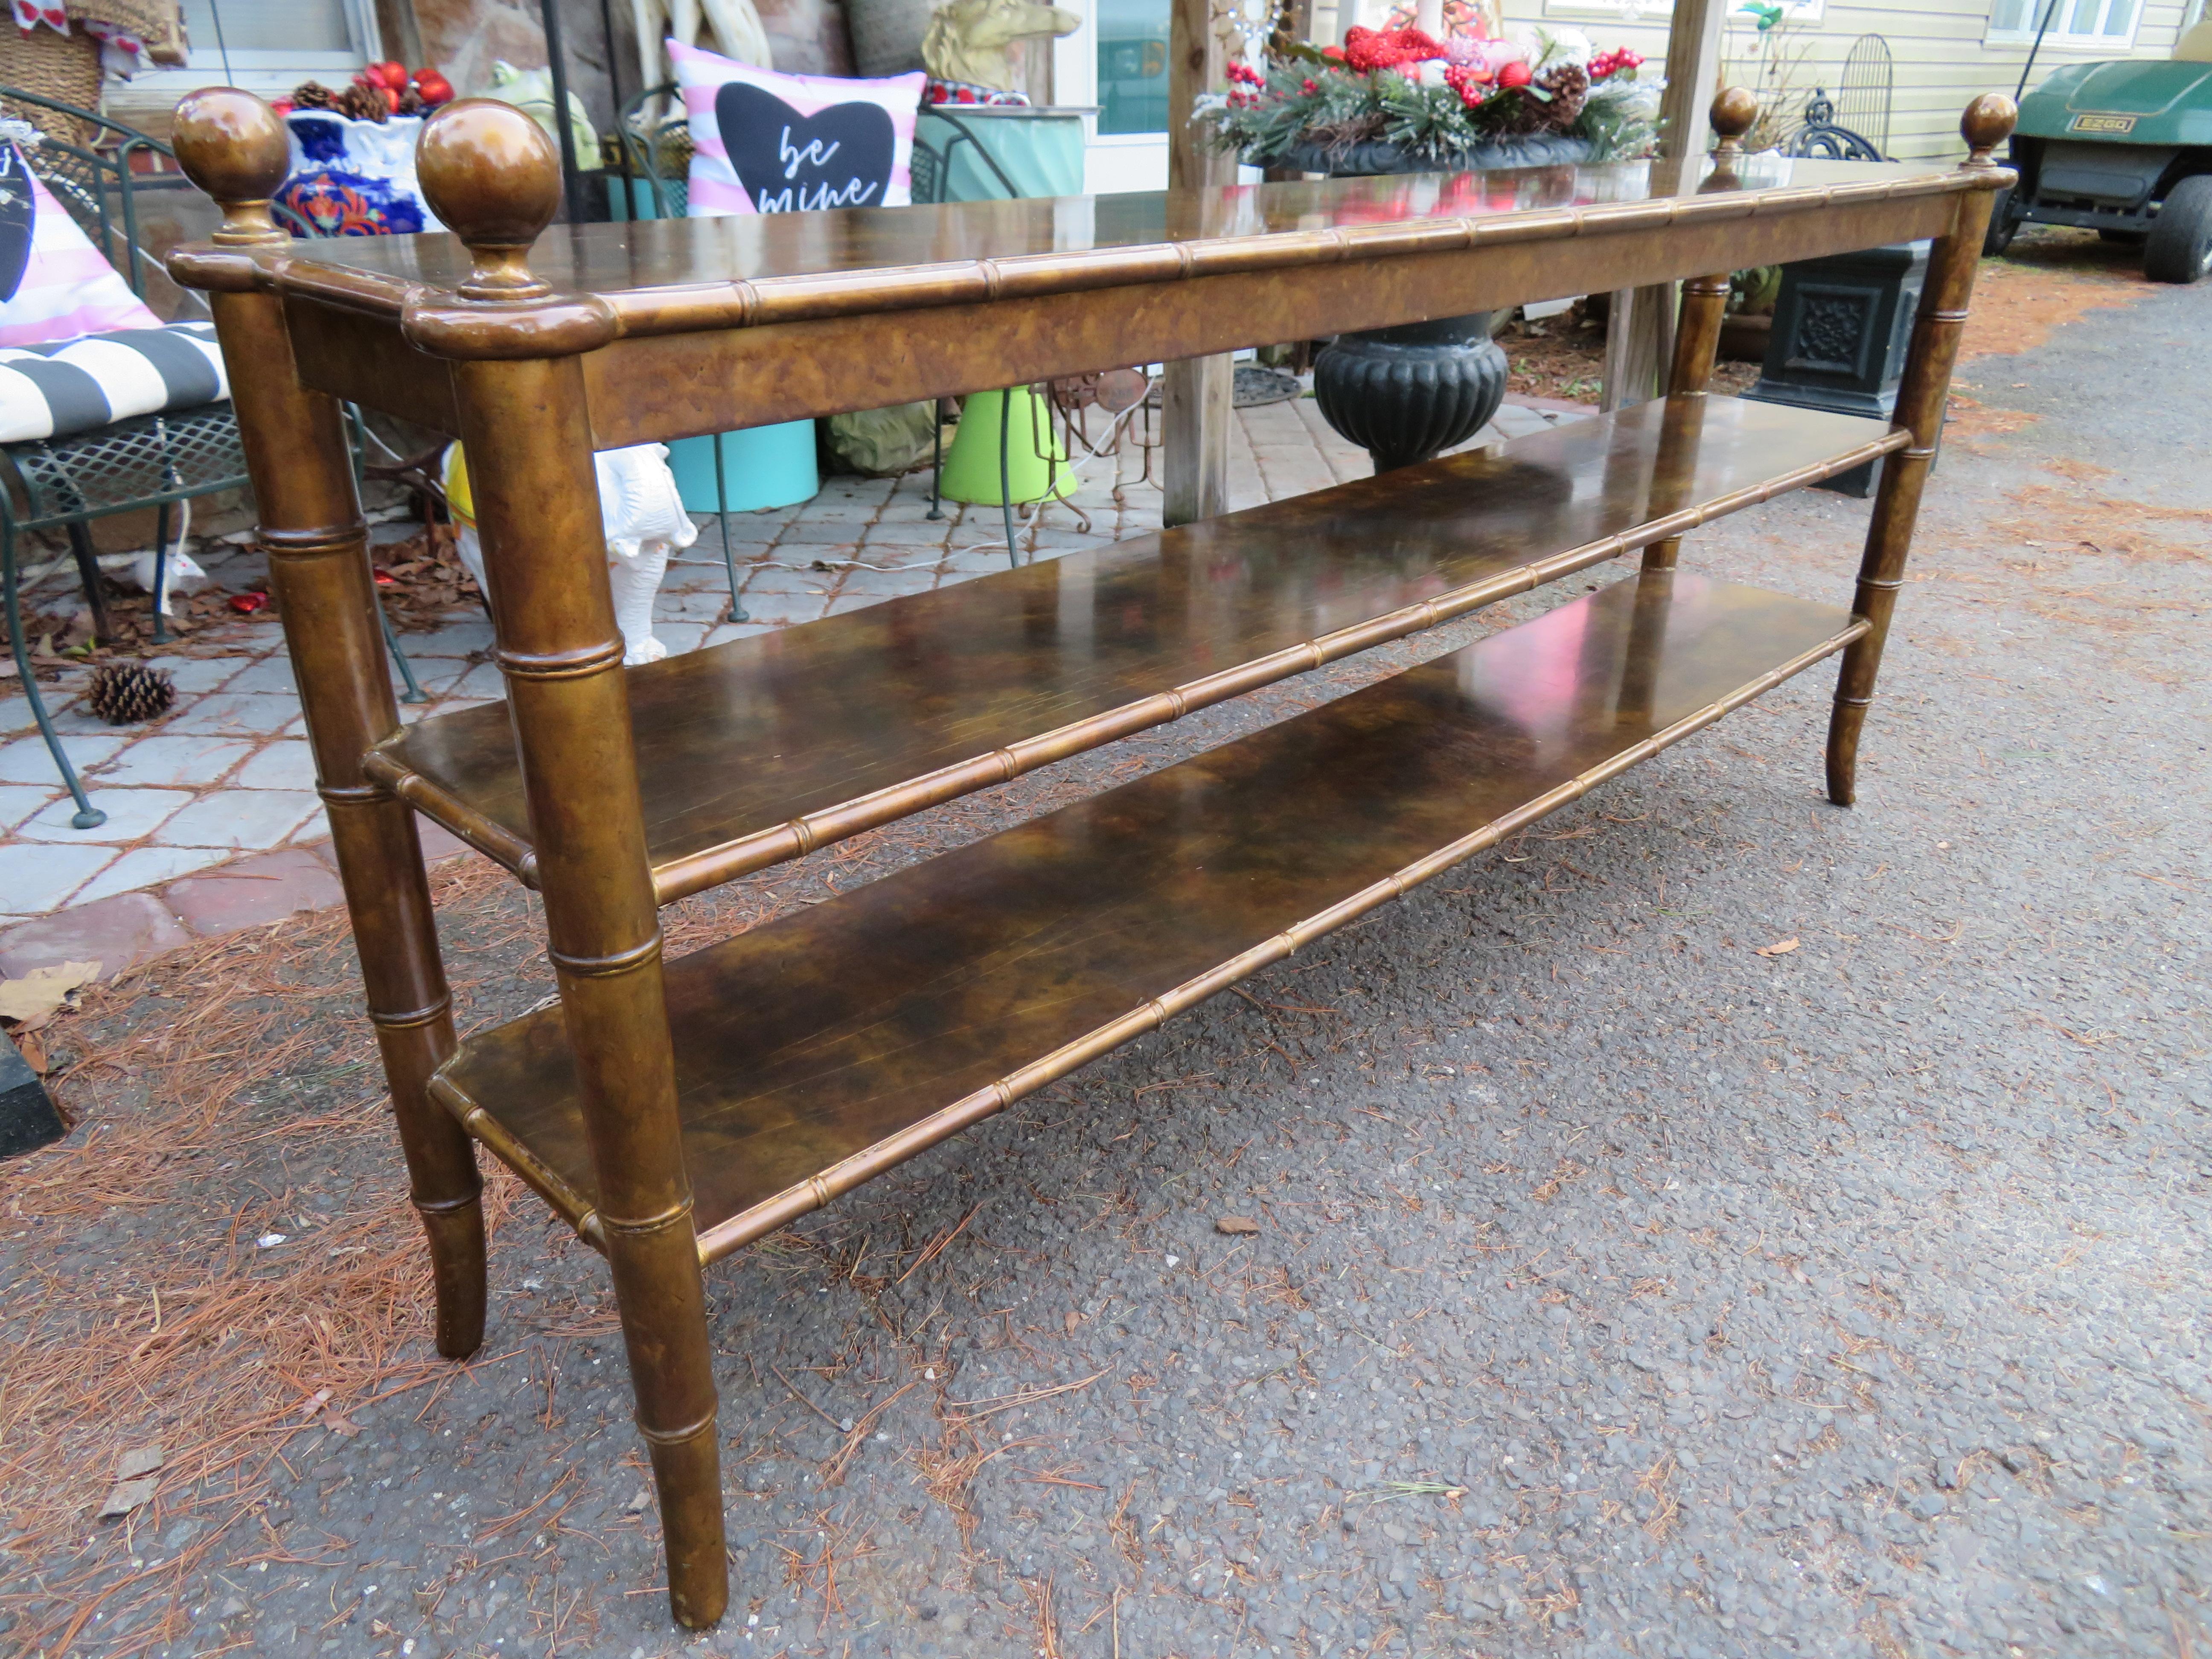 Mid-Century Chinoiserie long faux bamboo console table with a faux tortoiseshell high gloss lacquered finish.  We love the super long profile, the well-crafted carved faux bamboo legs, and the 3 tiers topped off with striking orbs on the corners. 